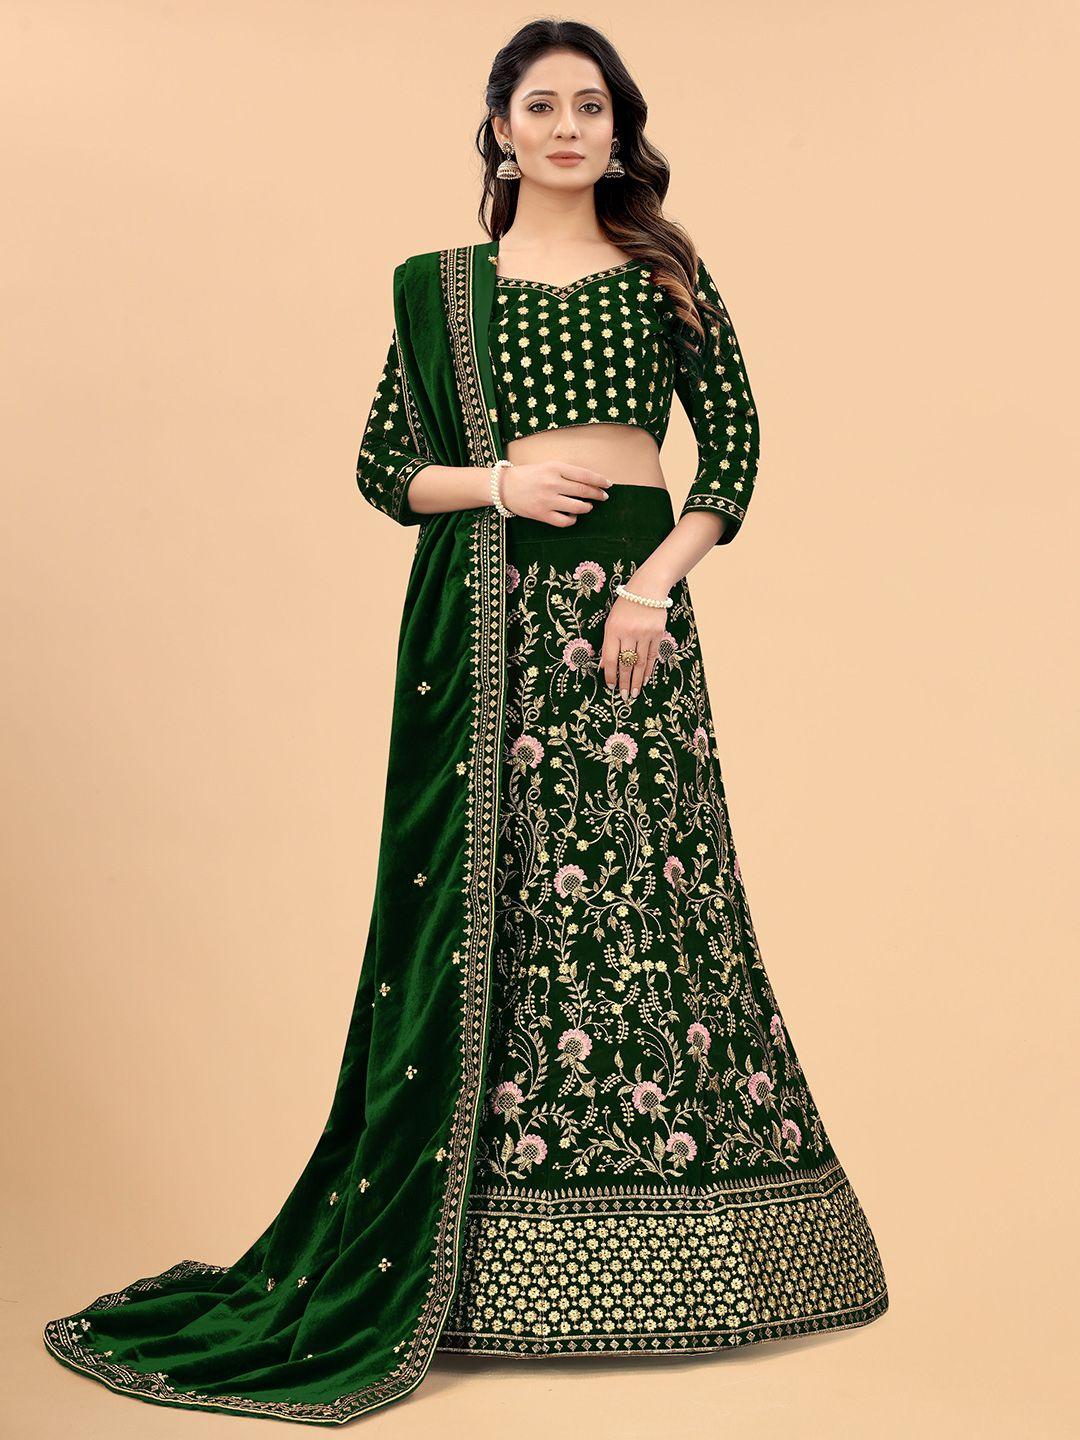 xenilla green & gold-toned embroidered semi-stitched lehenga & blouse with dupatta